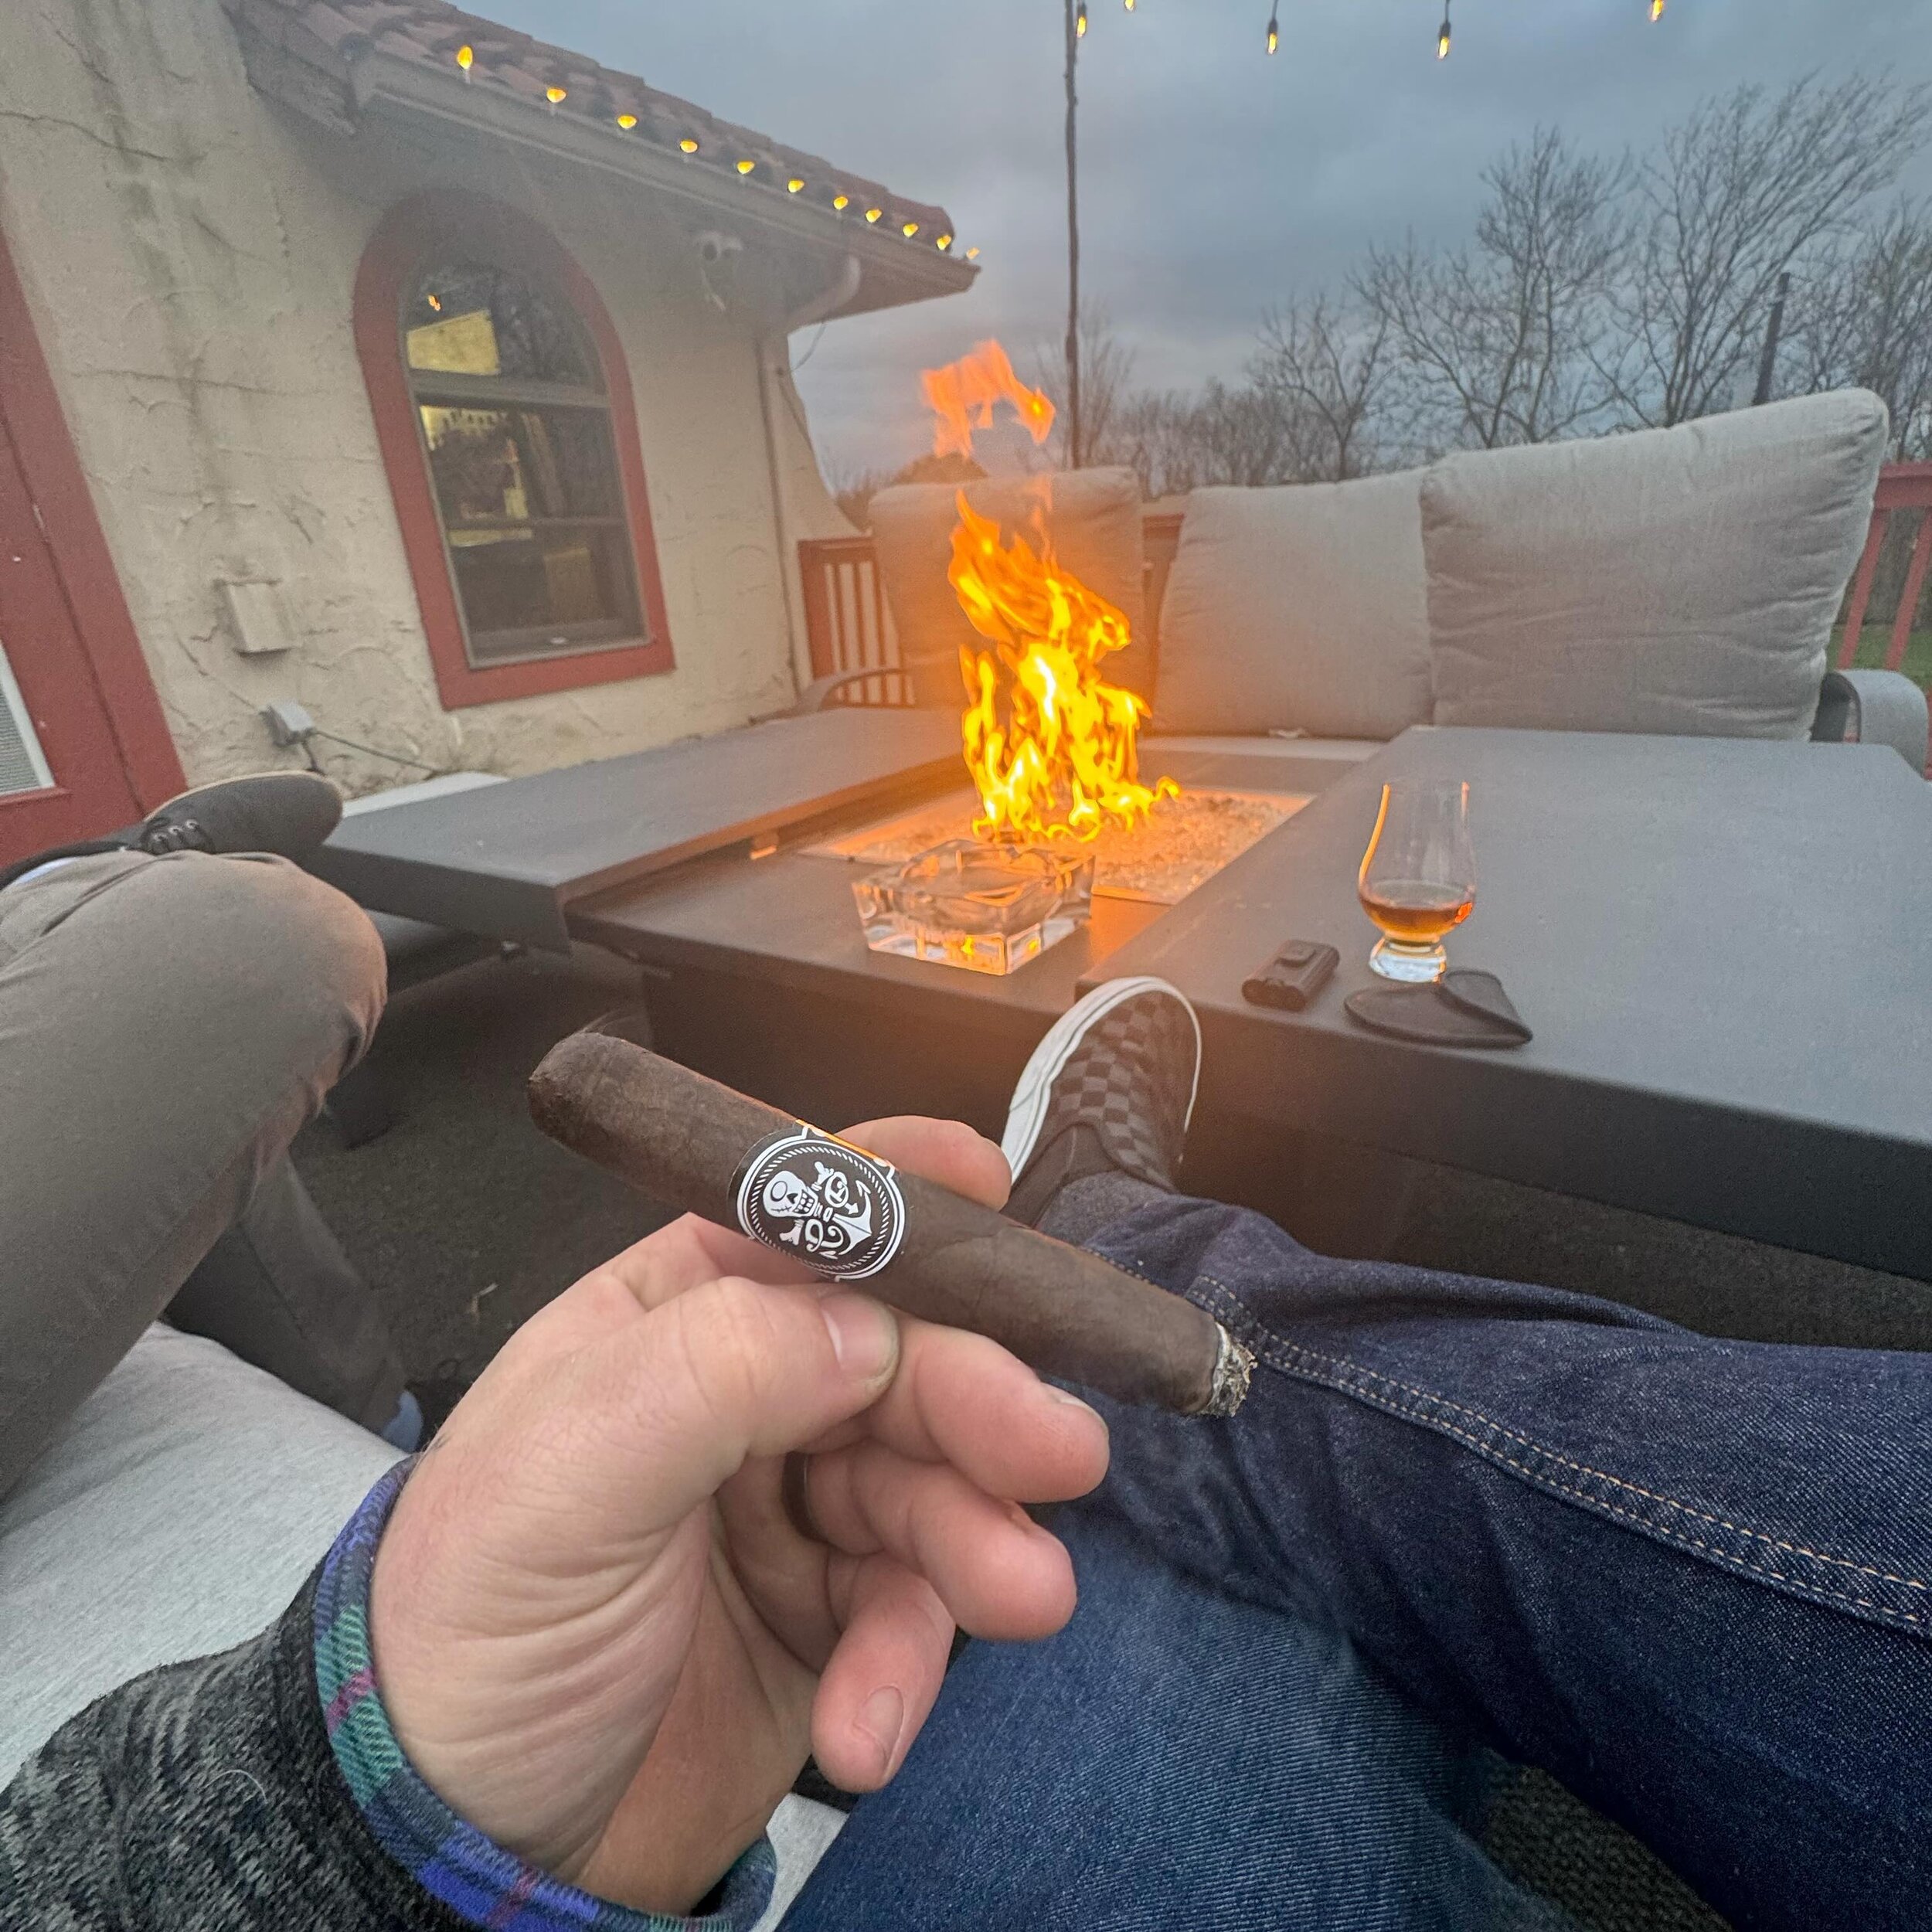 Craft &amp; Puro Cyclops around a fire, celebrating new openings with good friends. Always fairs well when a Cyclops is joined by a nice dram!
-
🤙🏻🏴&zwj;☠️🤙🏻🏴&zwj;☠️